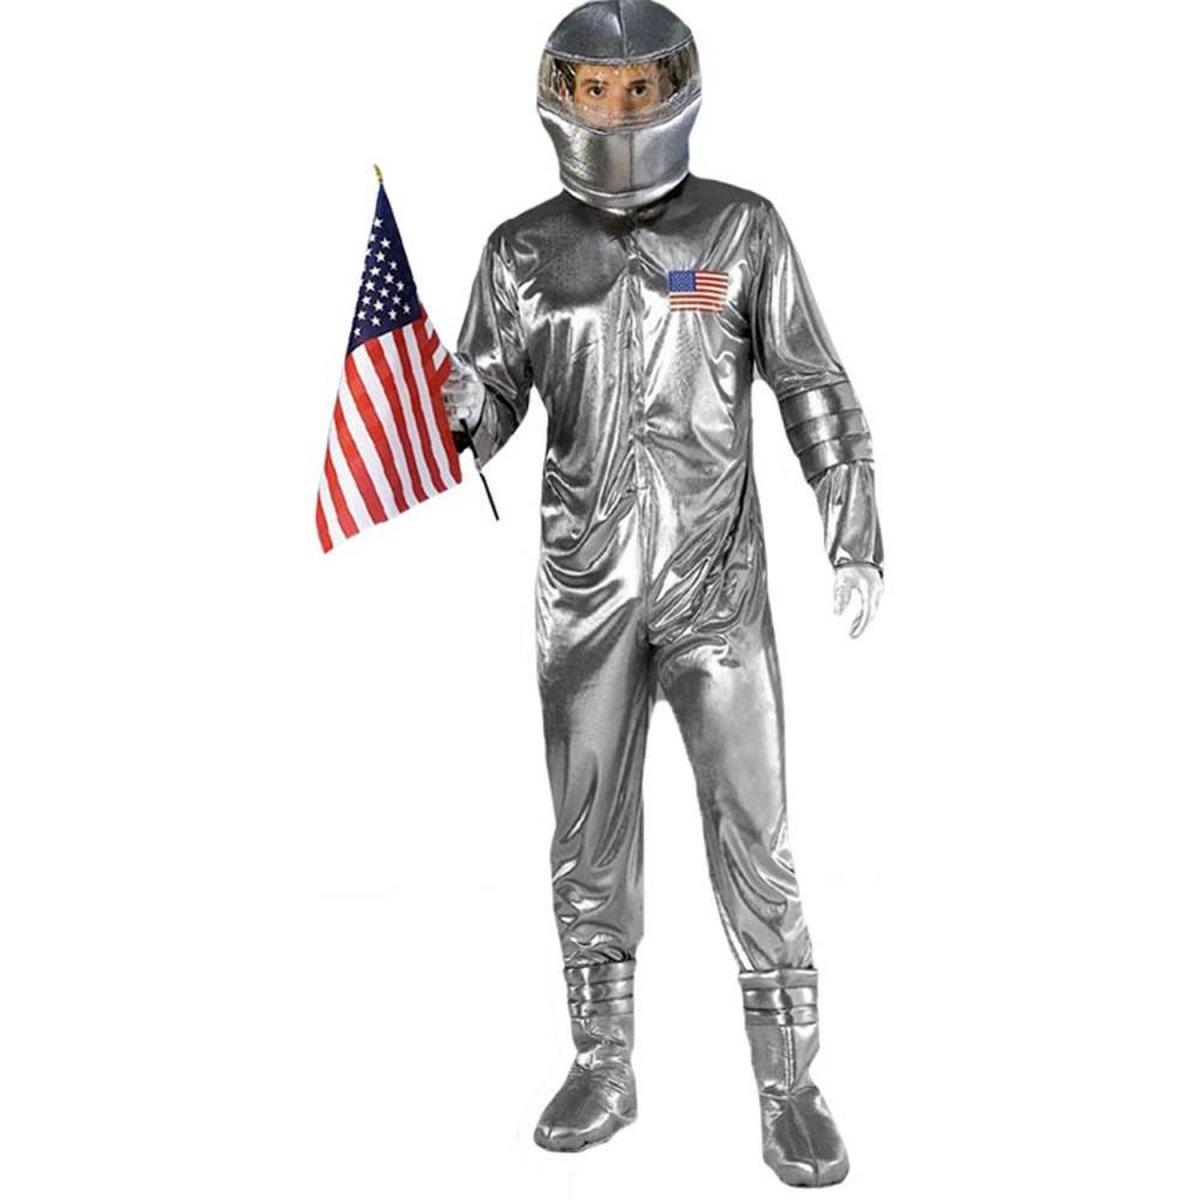 Spaceman costume